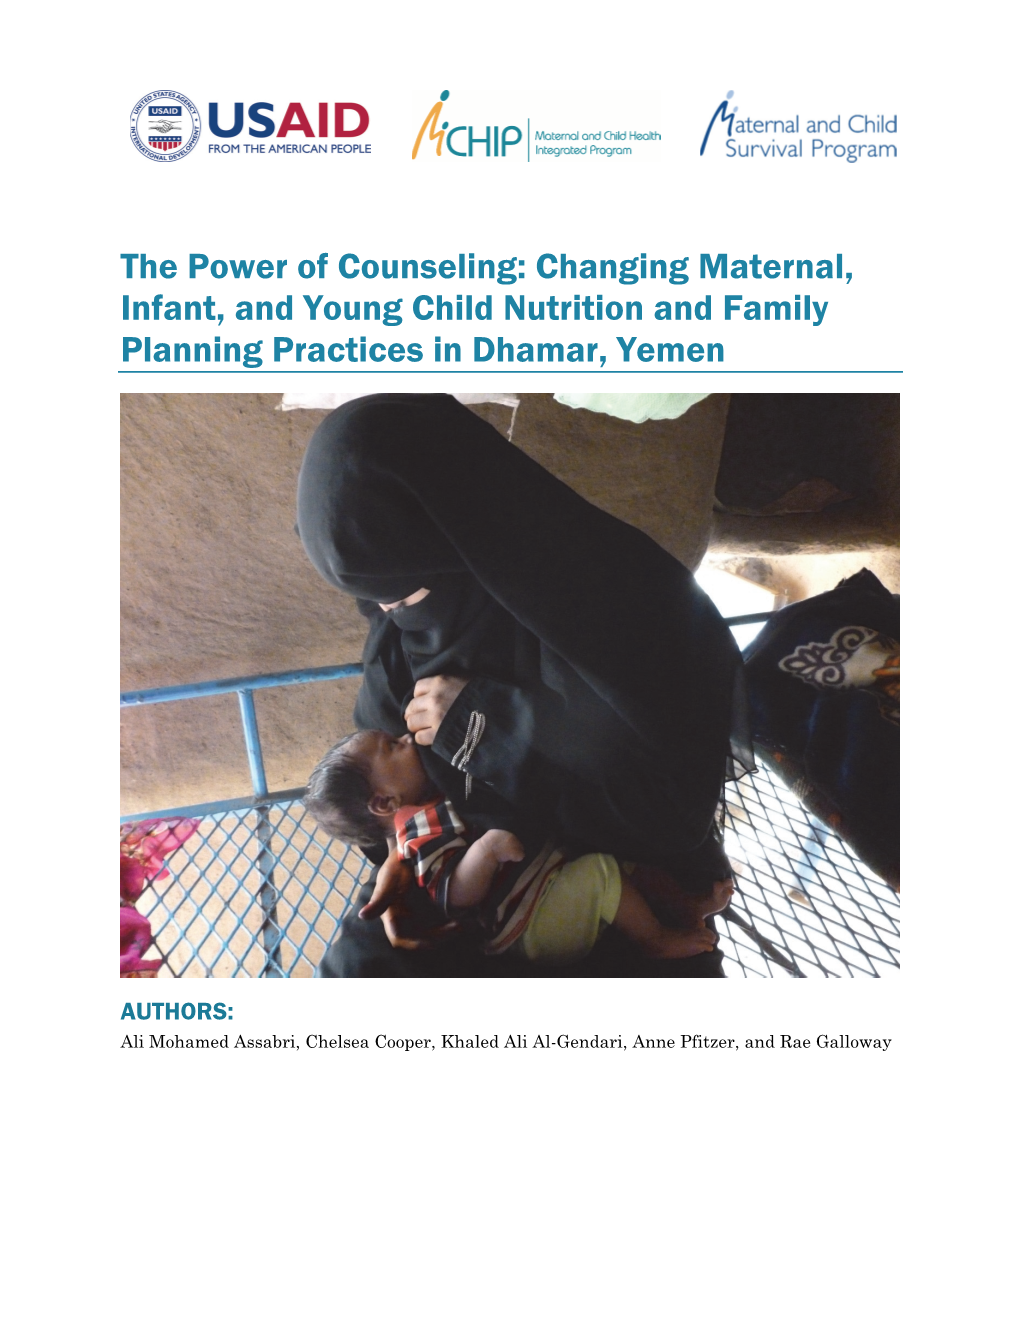 The Power of Counseling: Changing Maternal, Infant, and Young Child Nutrition and Family Planning Practices in Dhamar, Yemen